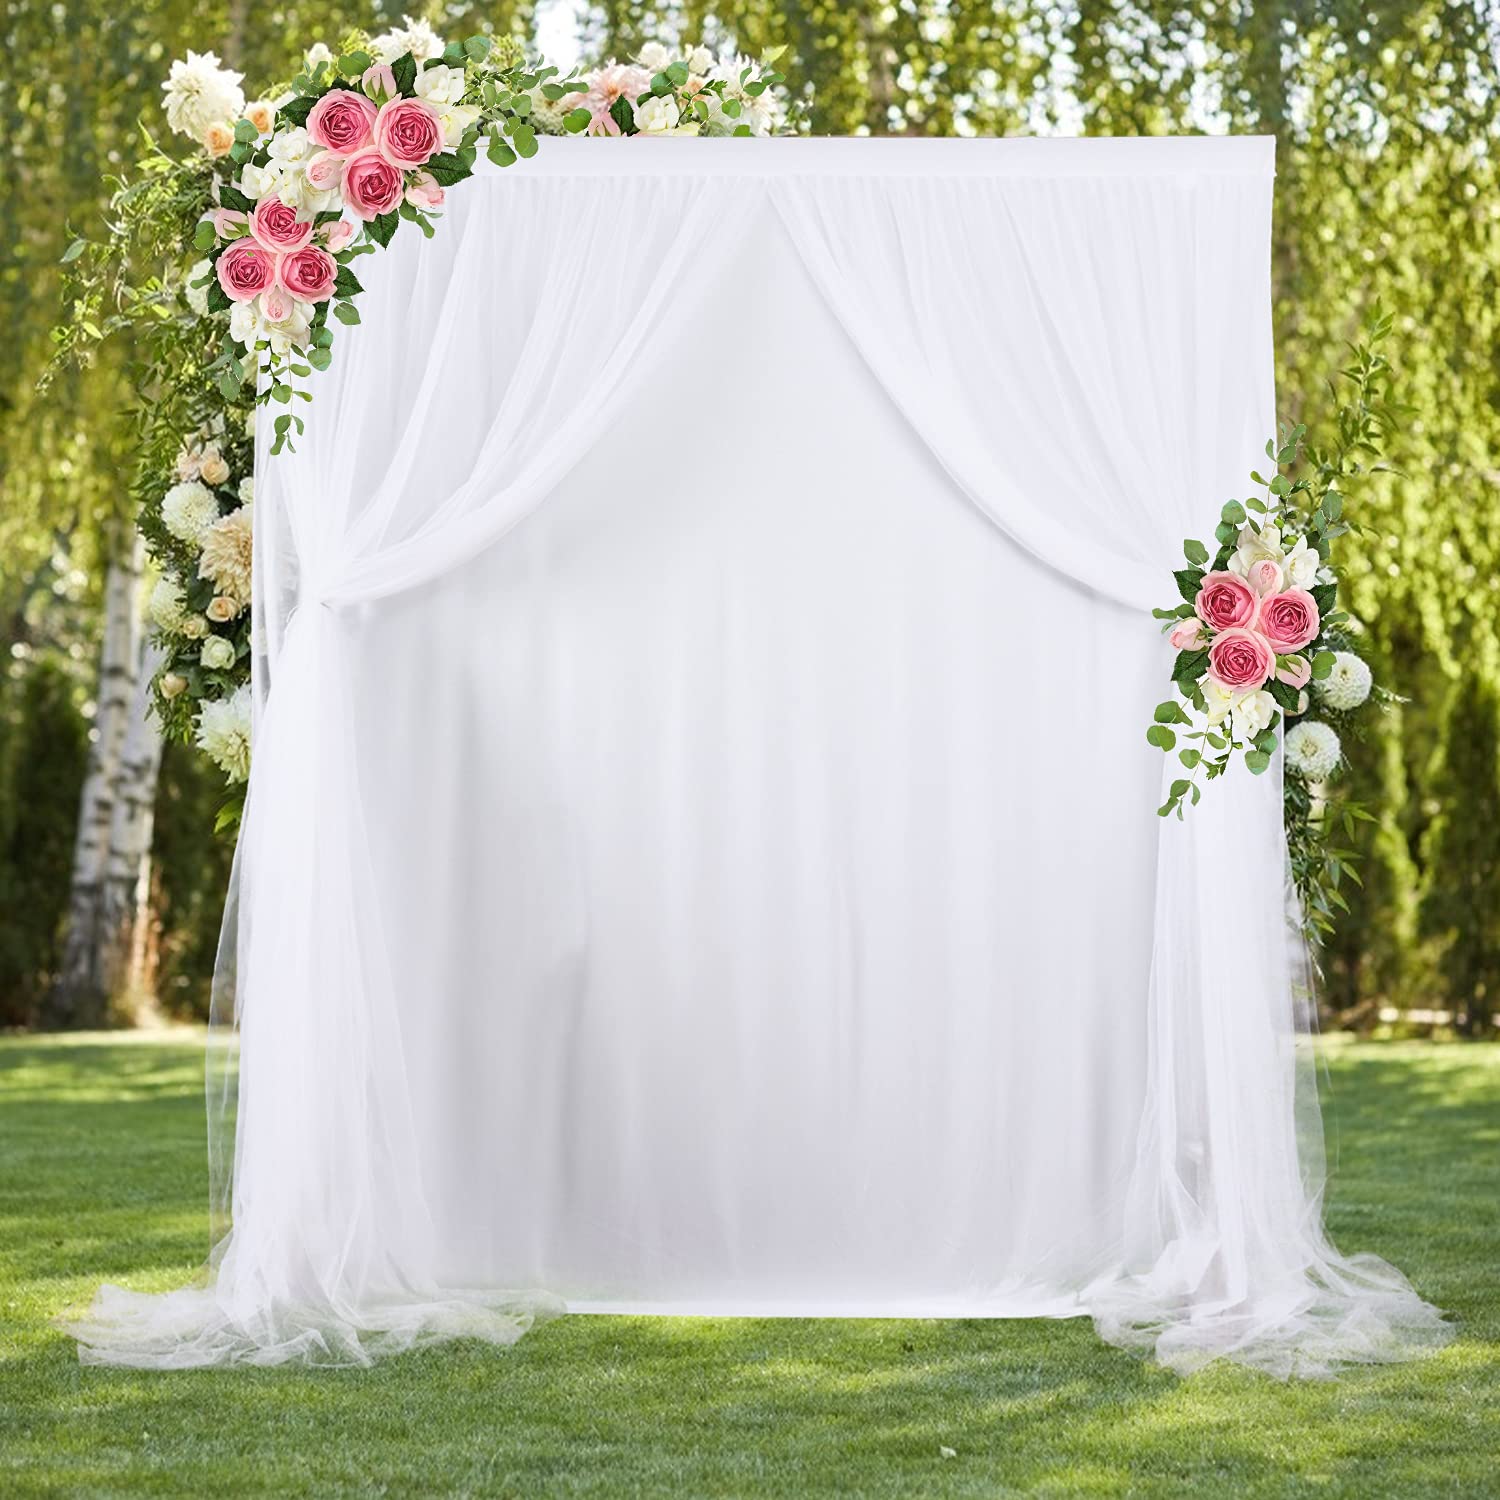 White Tulle Backdrop Curtain for Parties Wedding Baby Shower White Sheer Background for Bridal Shower Photography Props Gender Reveal Backdrop Drapes 5 ft X 7 ft